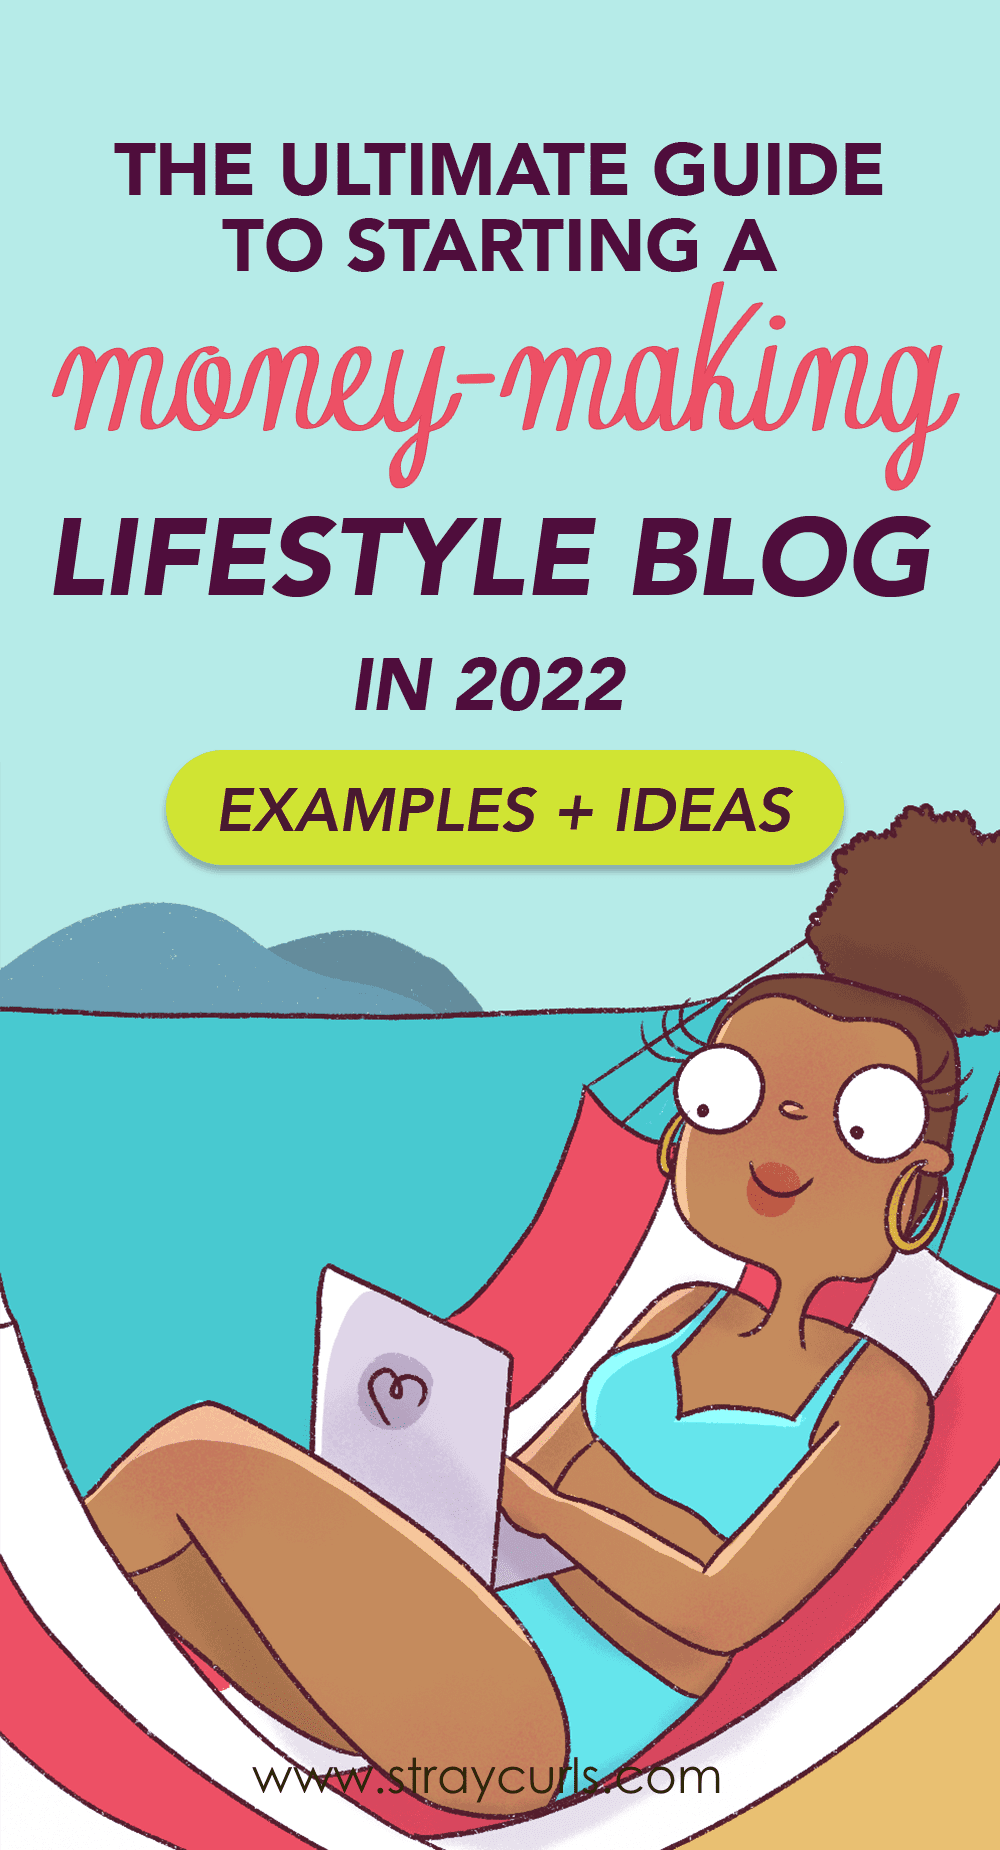 How to start a lifestyle blog from scratch in 2022. Learn how to start a money making lifestyle blog from scratch.